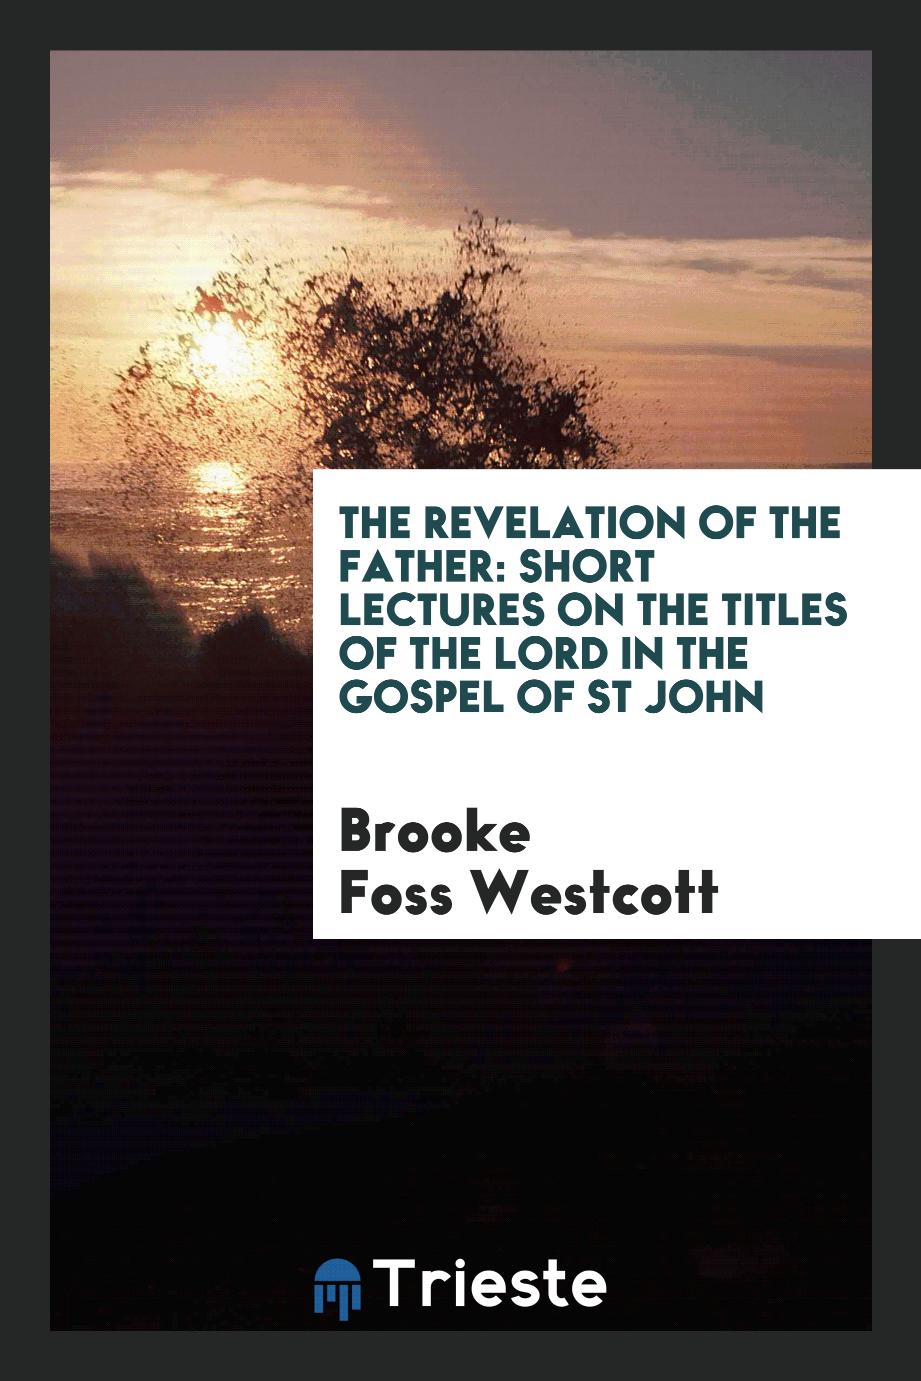 Brooke Foss Westcott - The revelation of the Father: short lectures on the titles of the Lord in the Gospel of St John